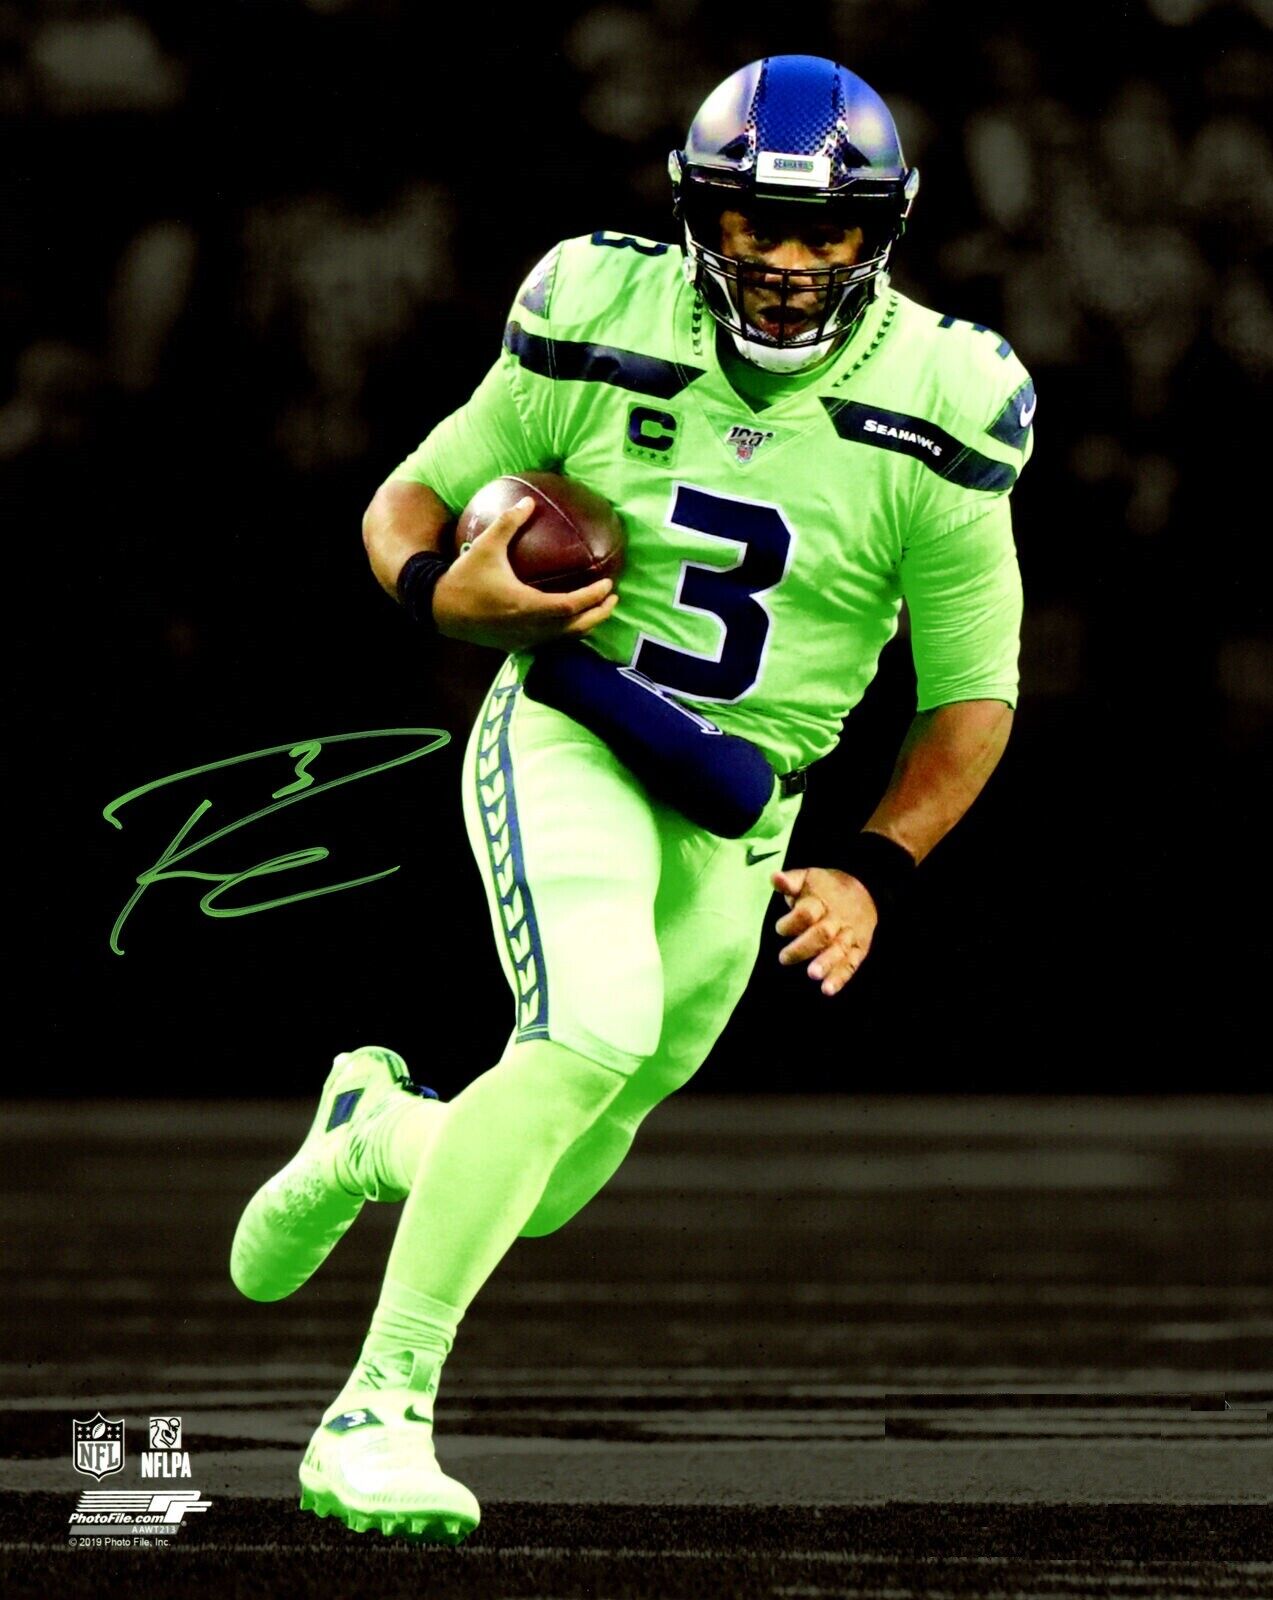 Russell Wilson Autographed Signed 8x10 Photo Poster painting ( Seahawks ) REPRINT ,